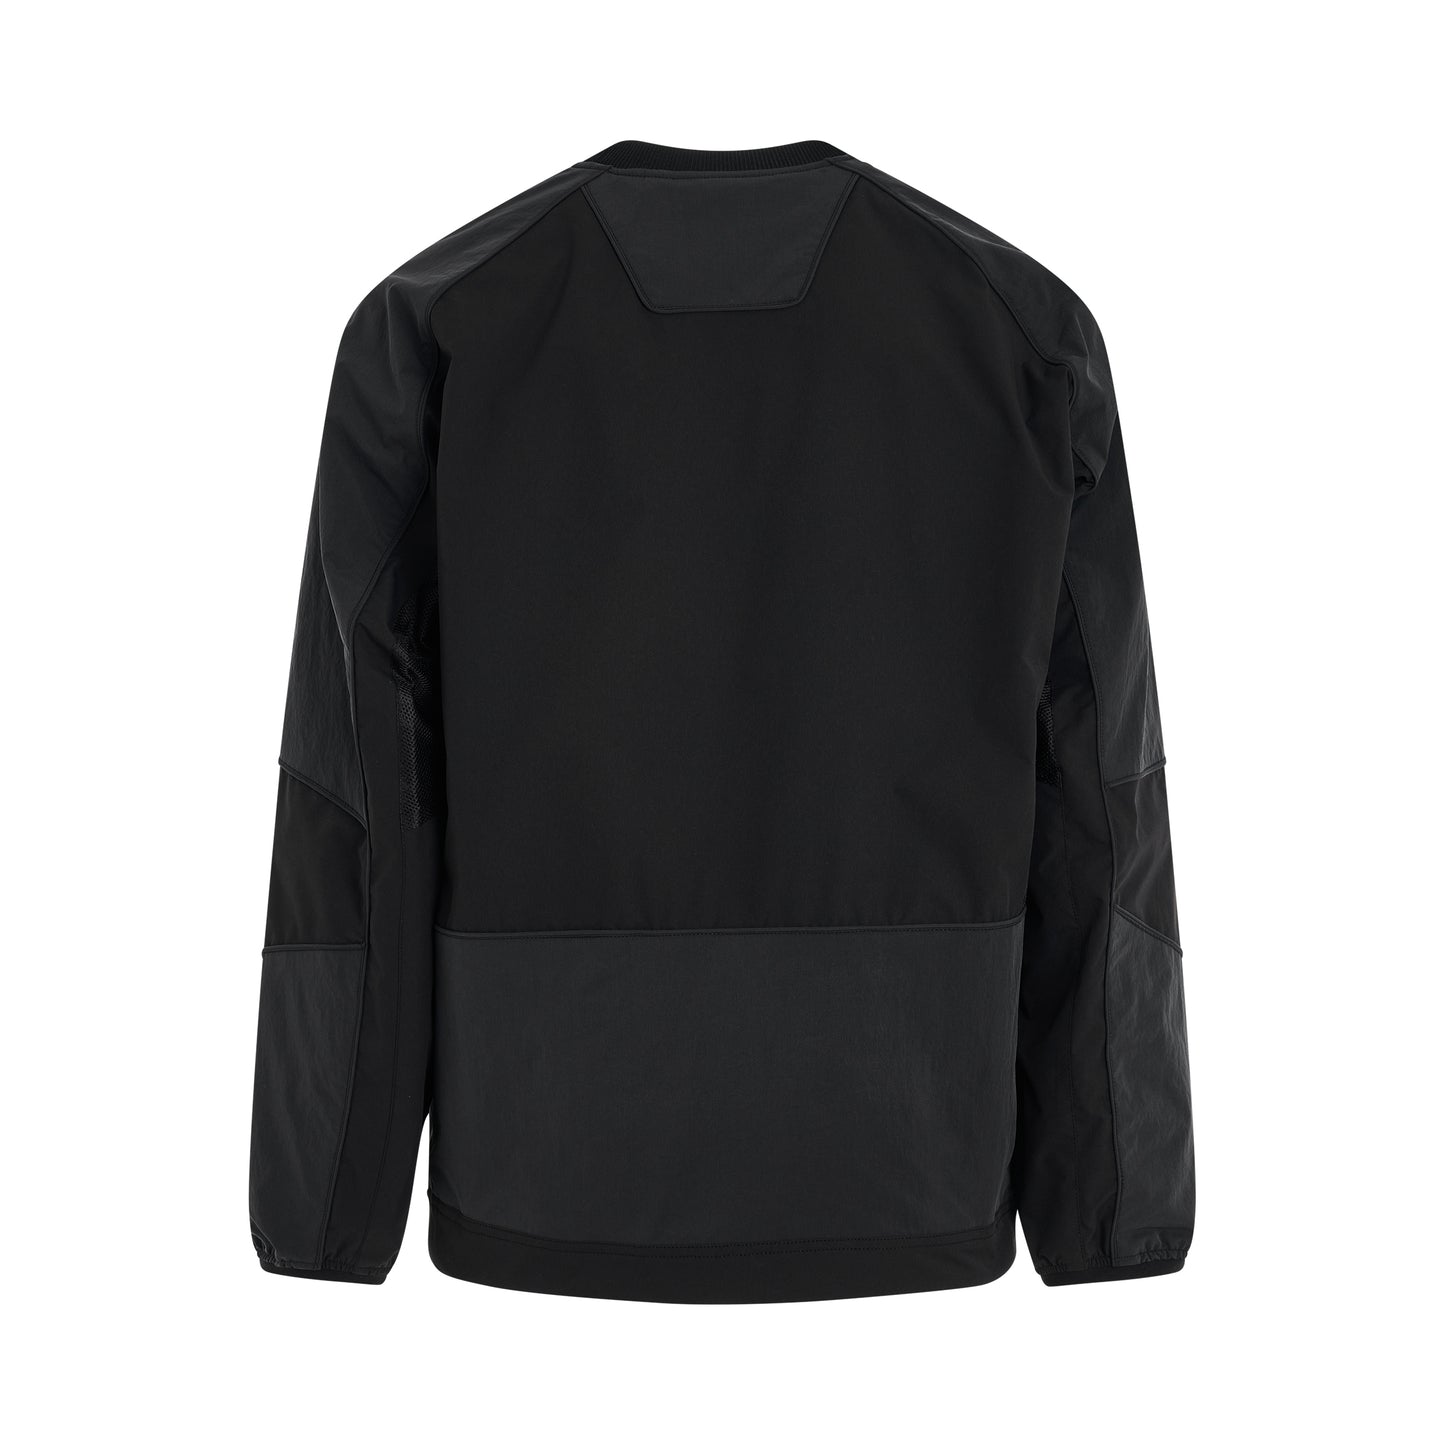 Tricot Piping Racer Sweater in Black